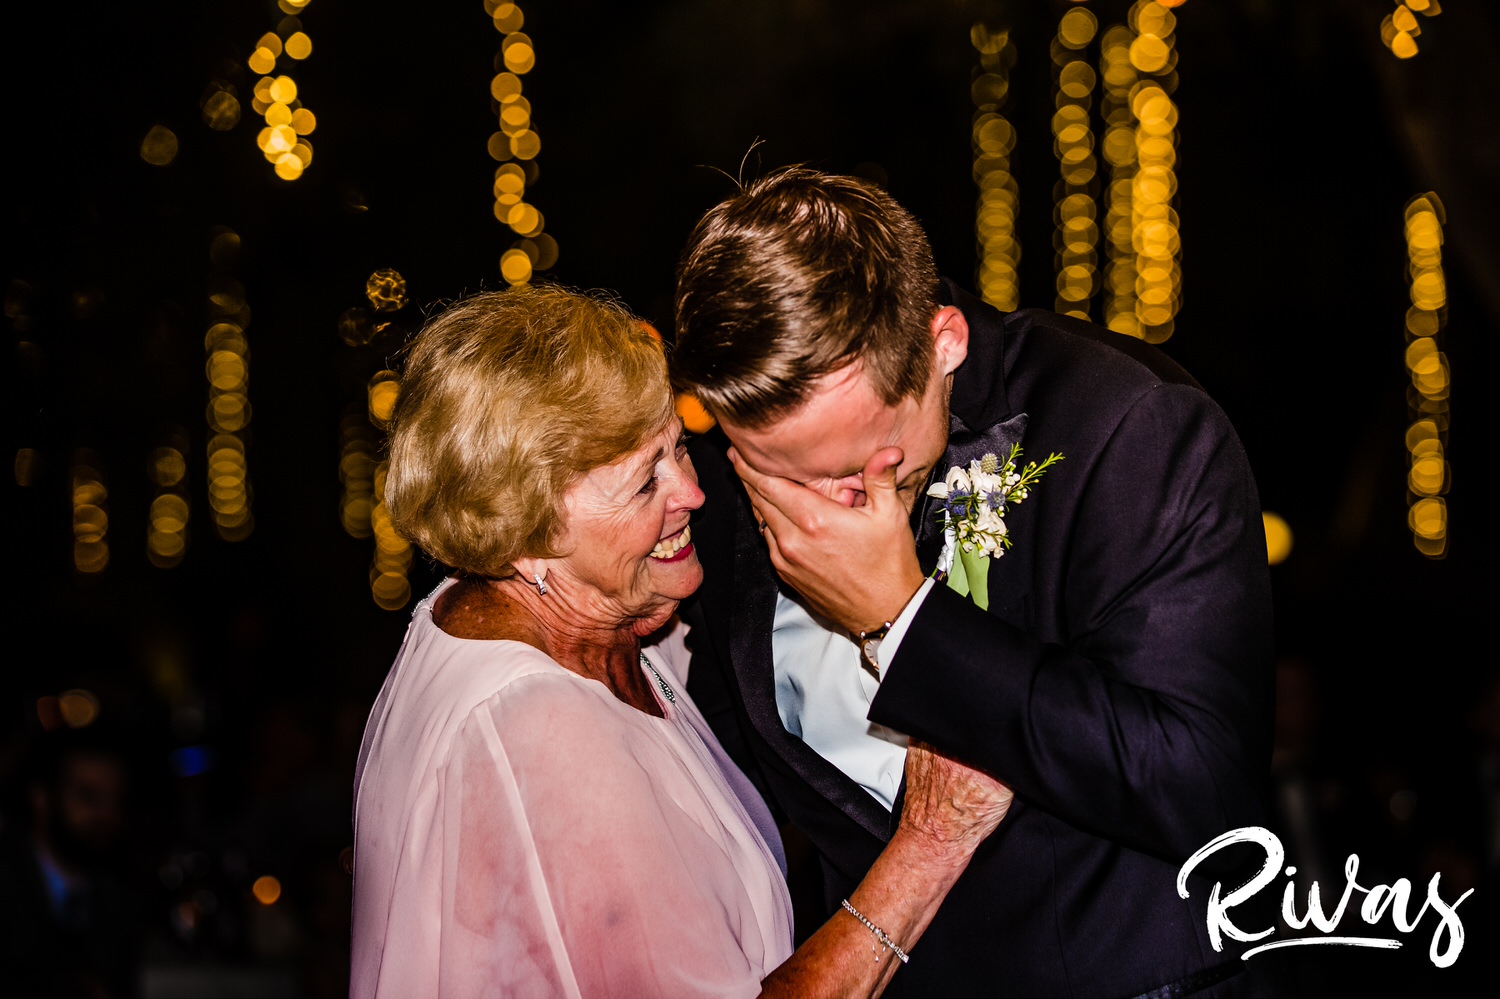 Saddlerock Ranch Summer Wedding | Destination Wedding Photographers | Rivas | An intimate photo of a groom dancing with his grandmother underneath a sea of ropes of twinkly lights during his wedding reception at Saddlerock Ranch in Malibu. 